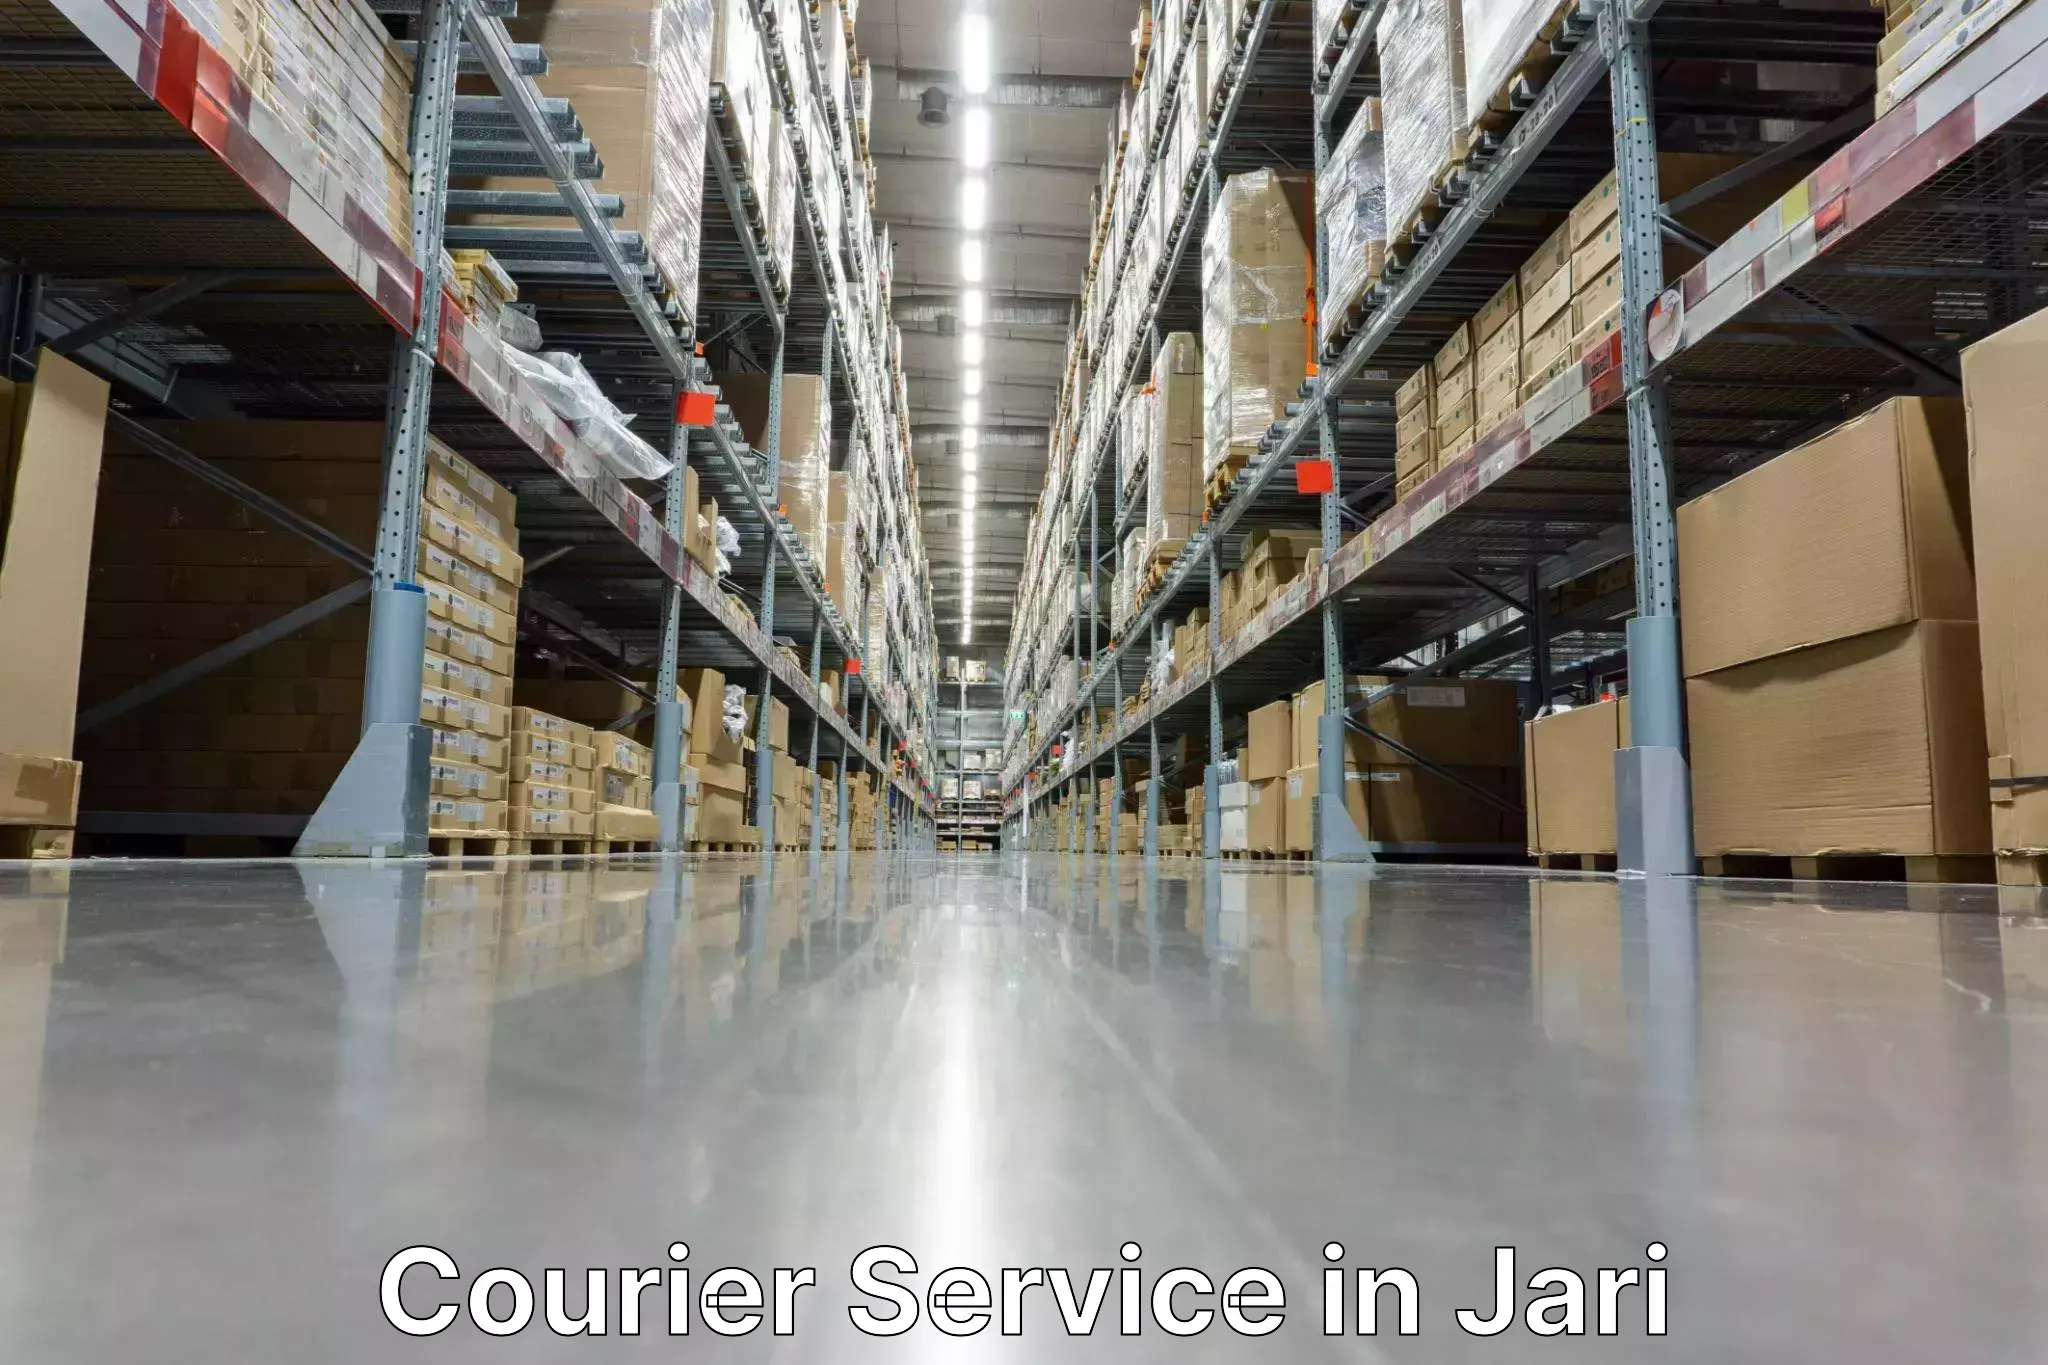 Personal parcel delivery in Jari